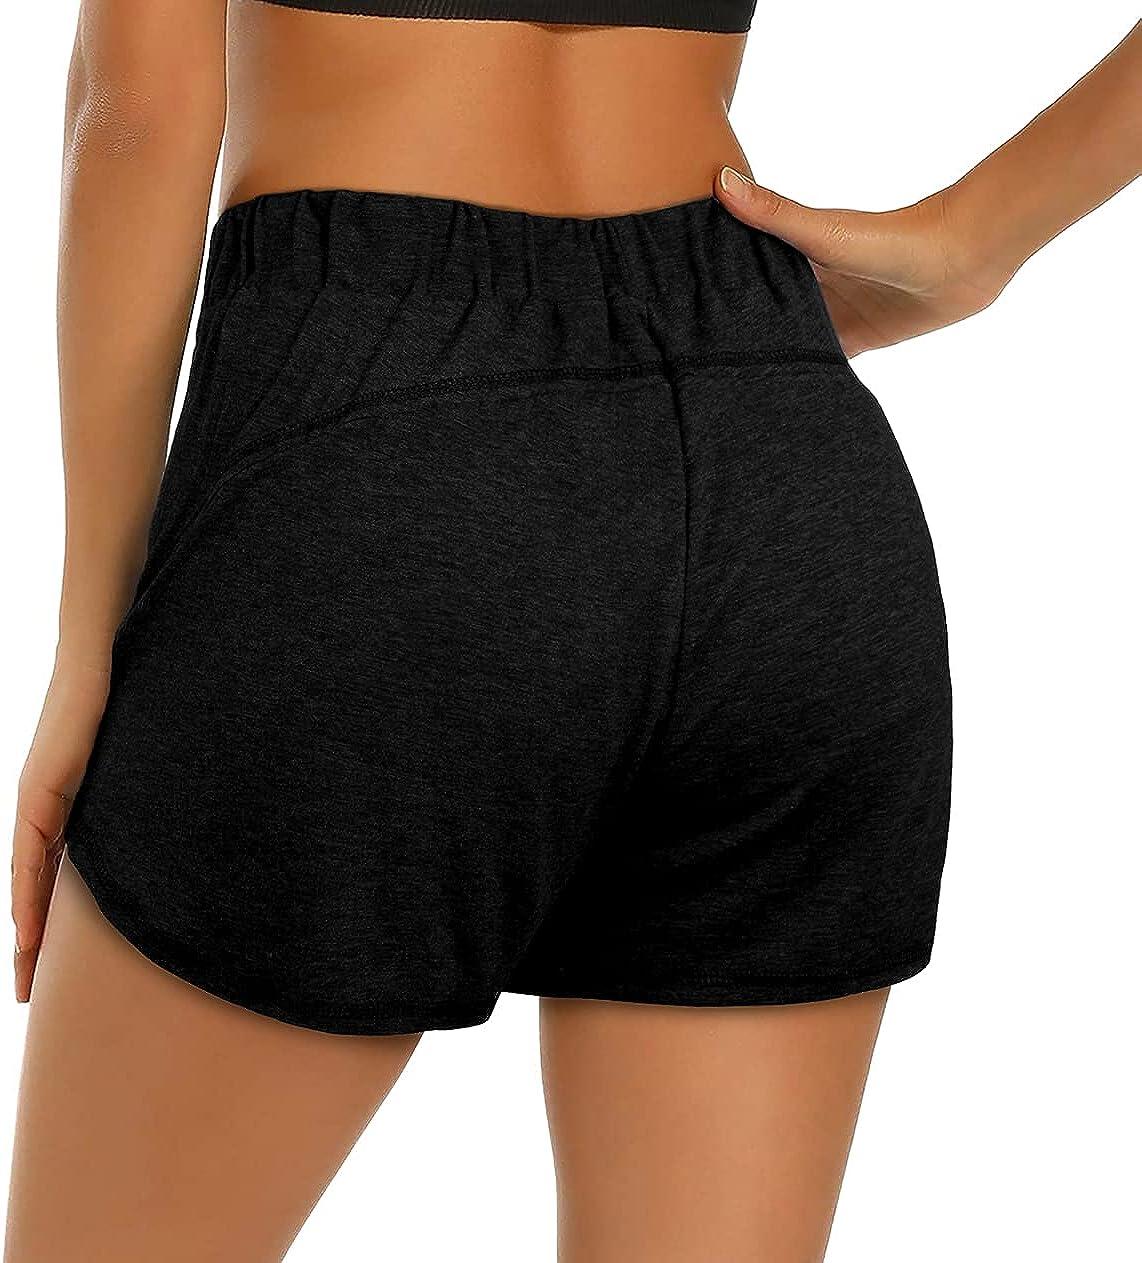  Black Animal Print Cute Cat Running Shorts for Women High  Waisted Athletic Shorts Quick Dry Workout Sports with Pockets-S : Clothing,  Shoes & Jewelry